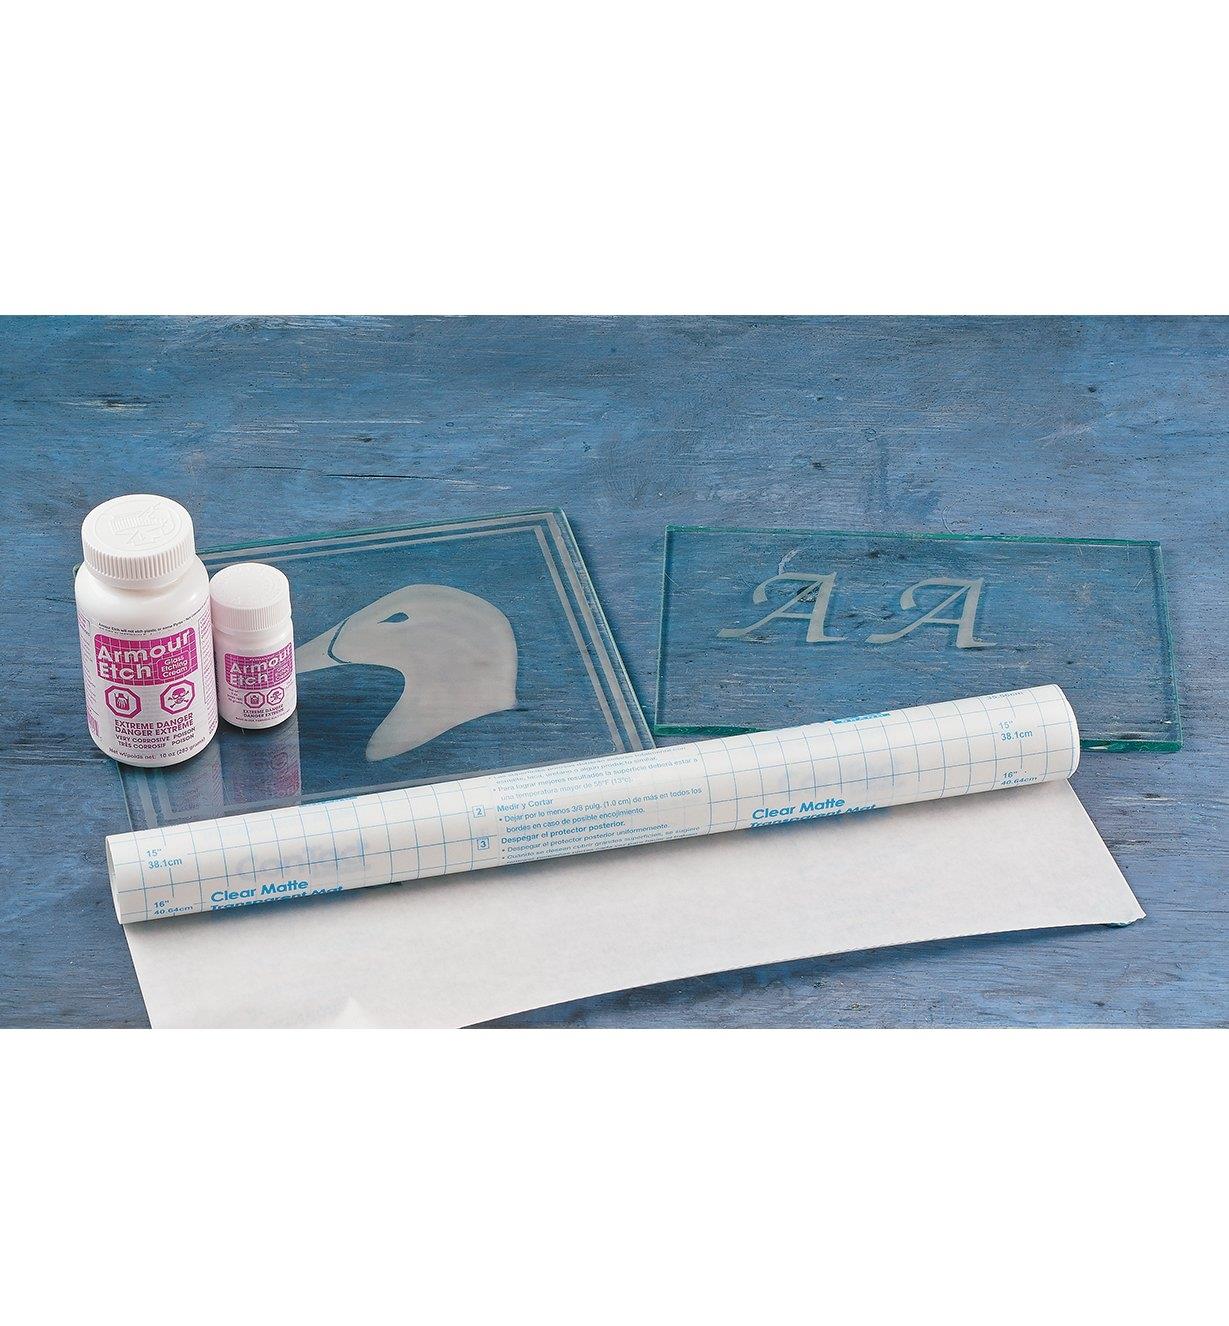 Roll of Vinyl Masking with etching cream and two glass projects with etched designs